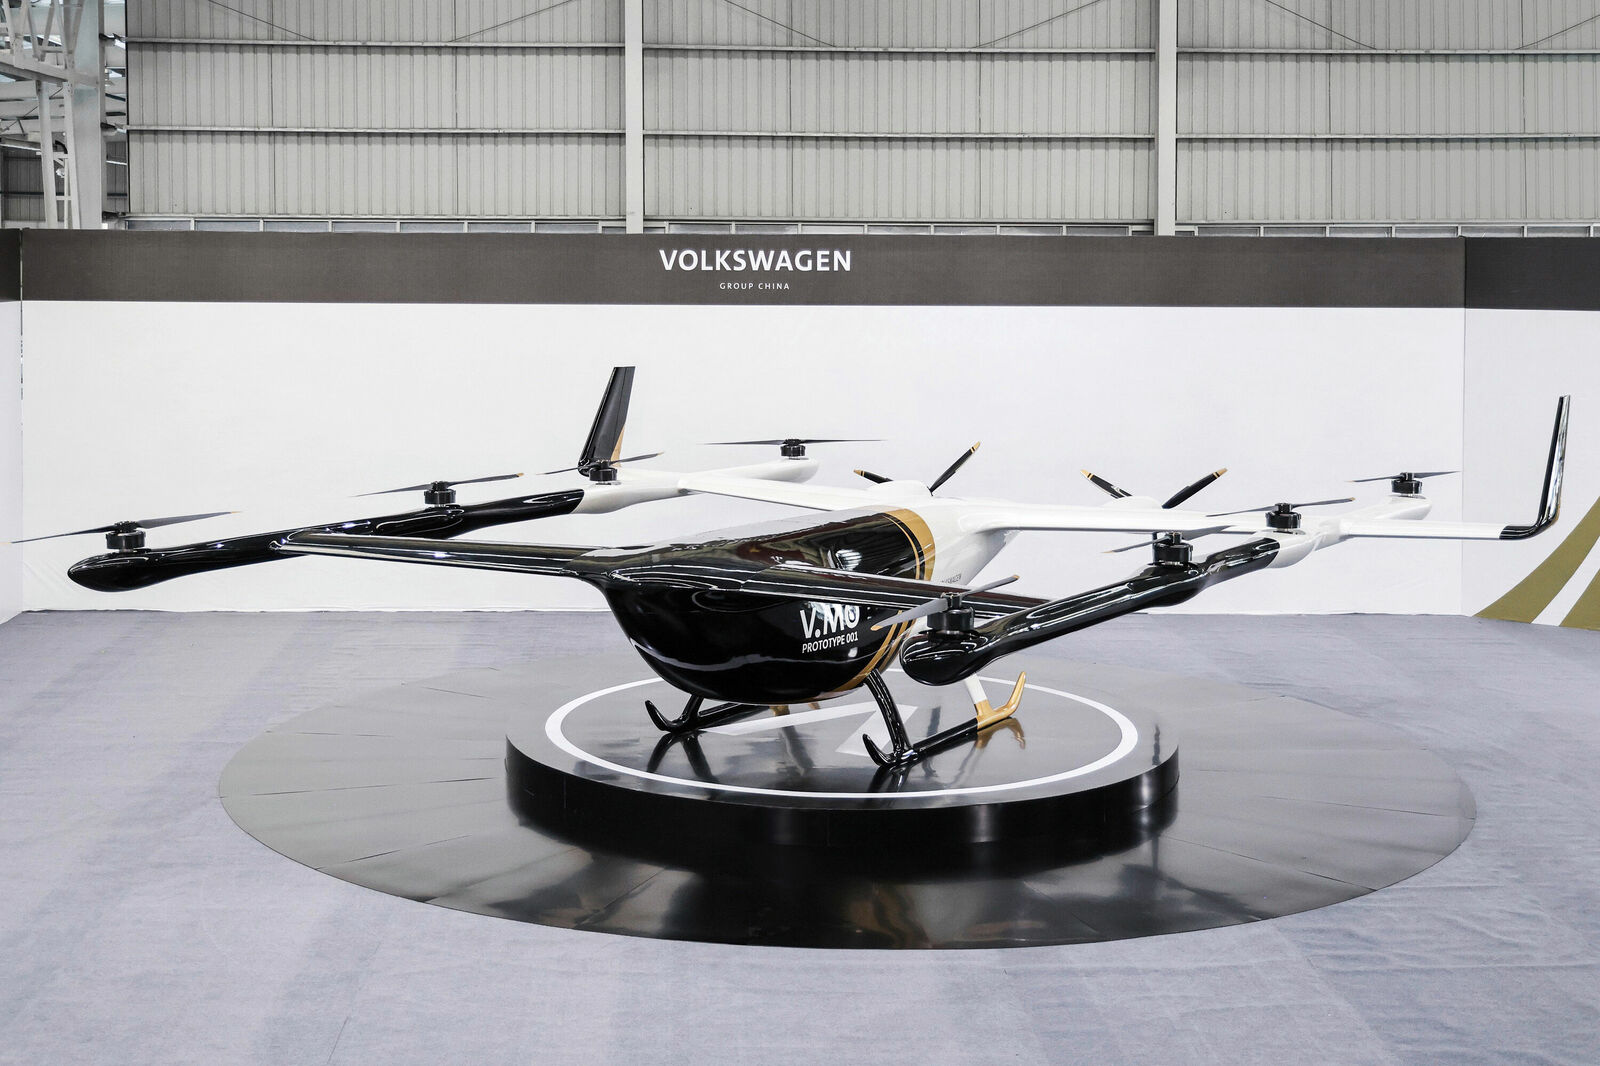 Meet the V.MO – Volkswagen Group China unveils state-of-the-art passenger drone prototype